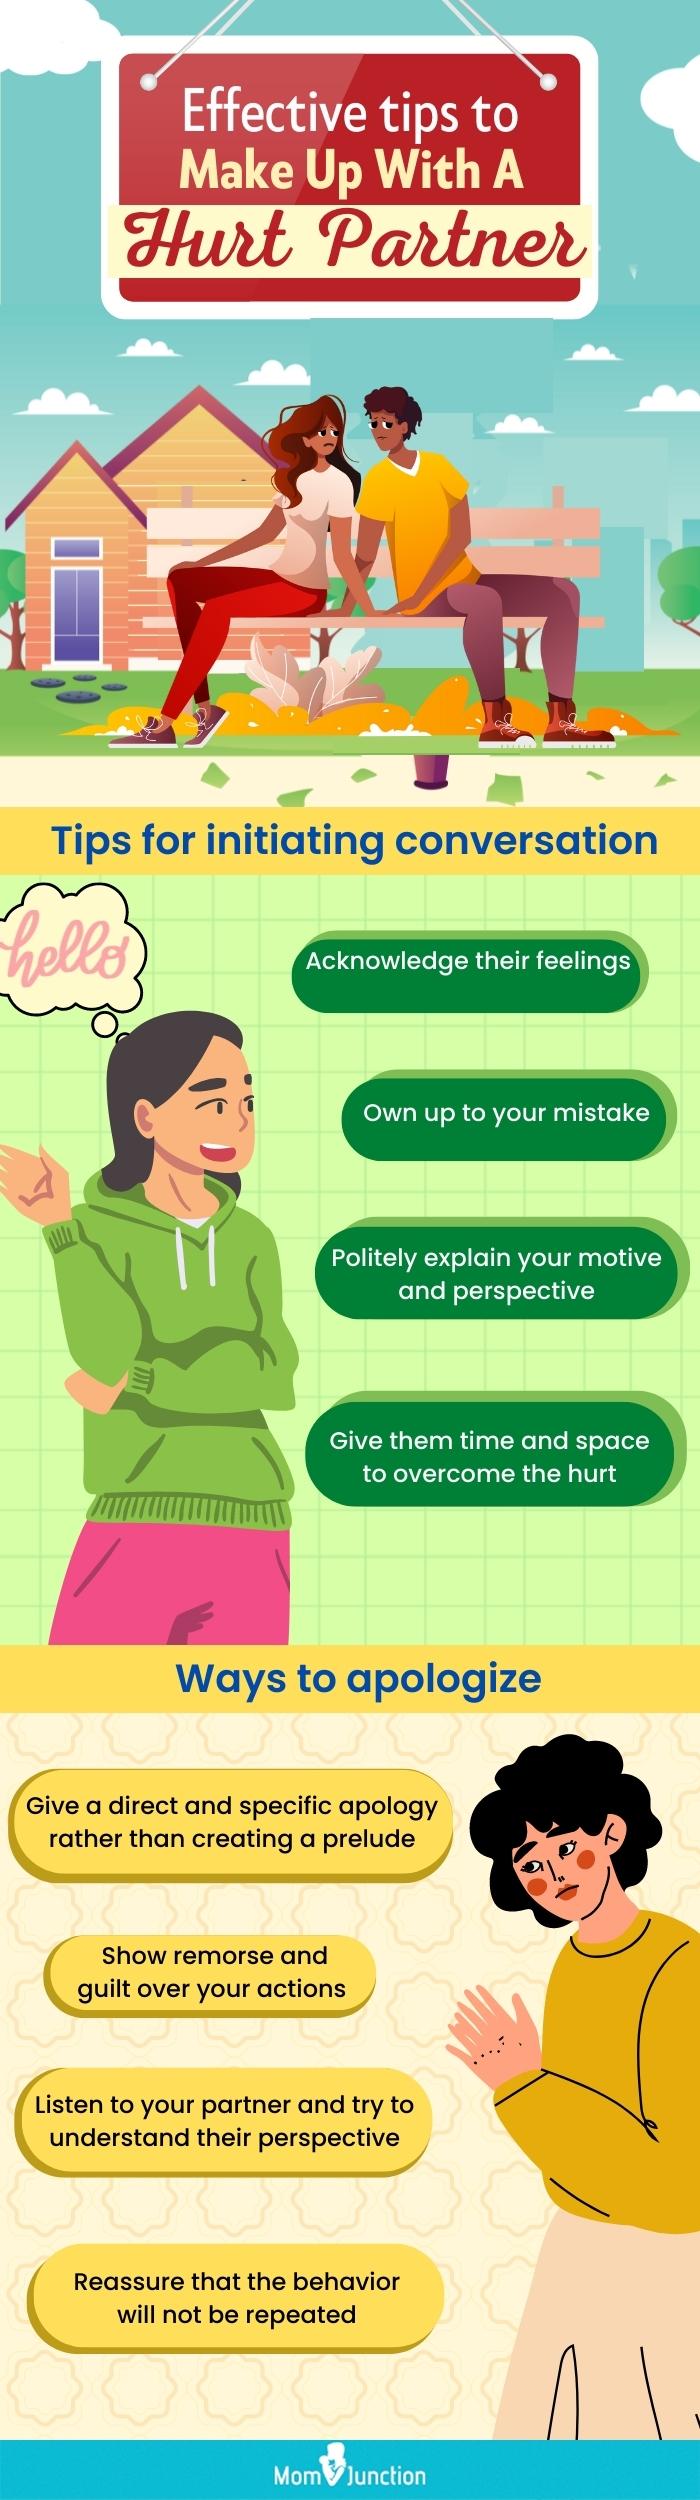 tips to make up with a hurt partner (infographic)